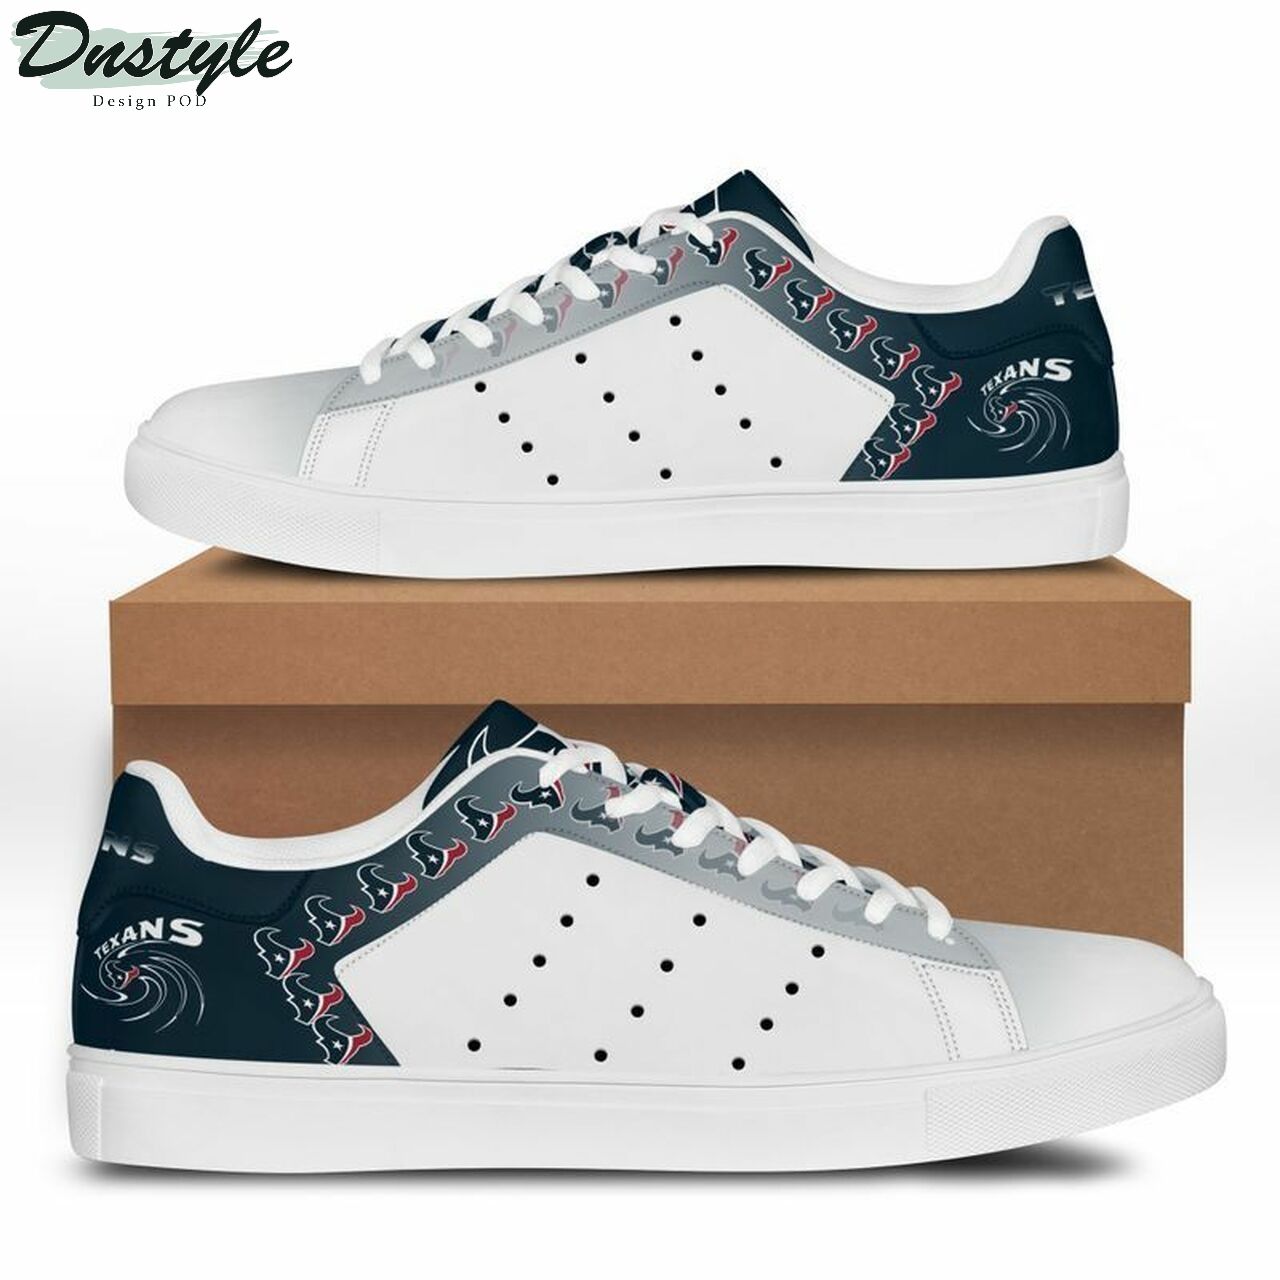 Houston Texans NFL stan smith low top skate shoes